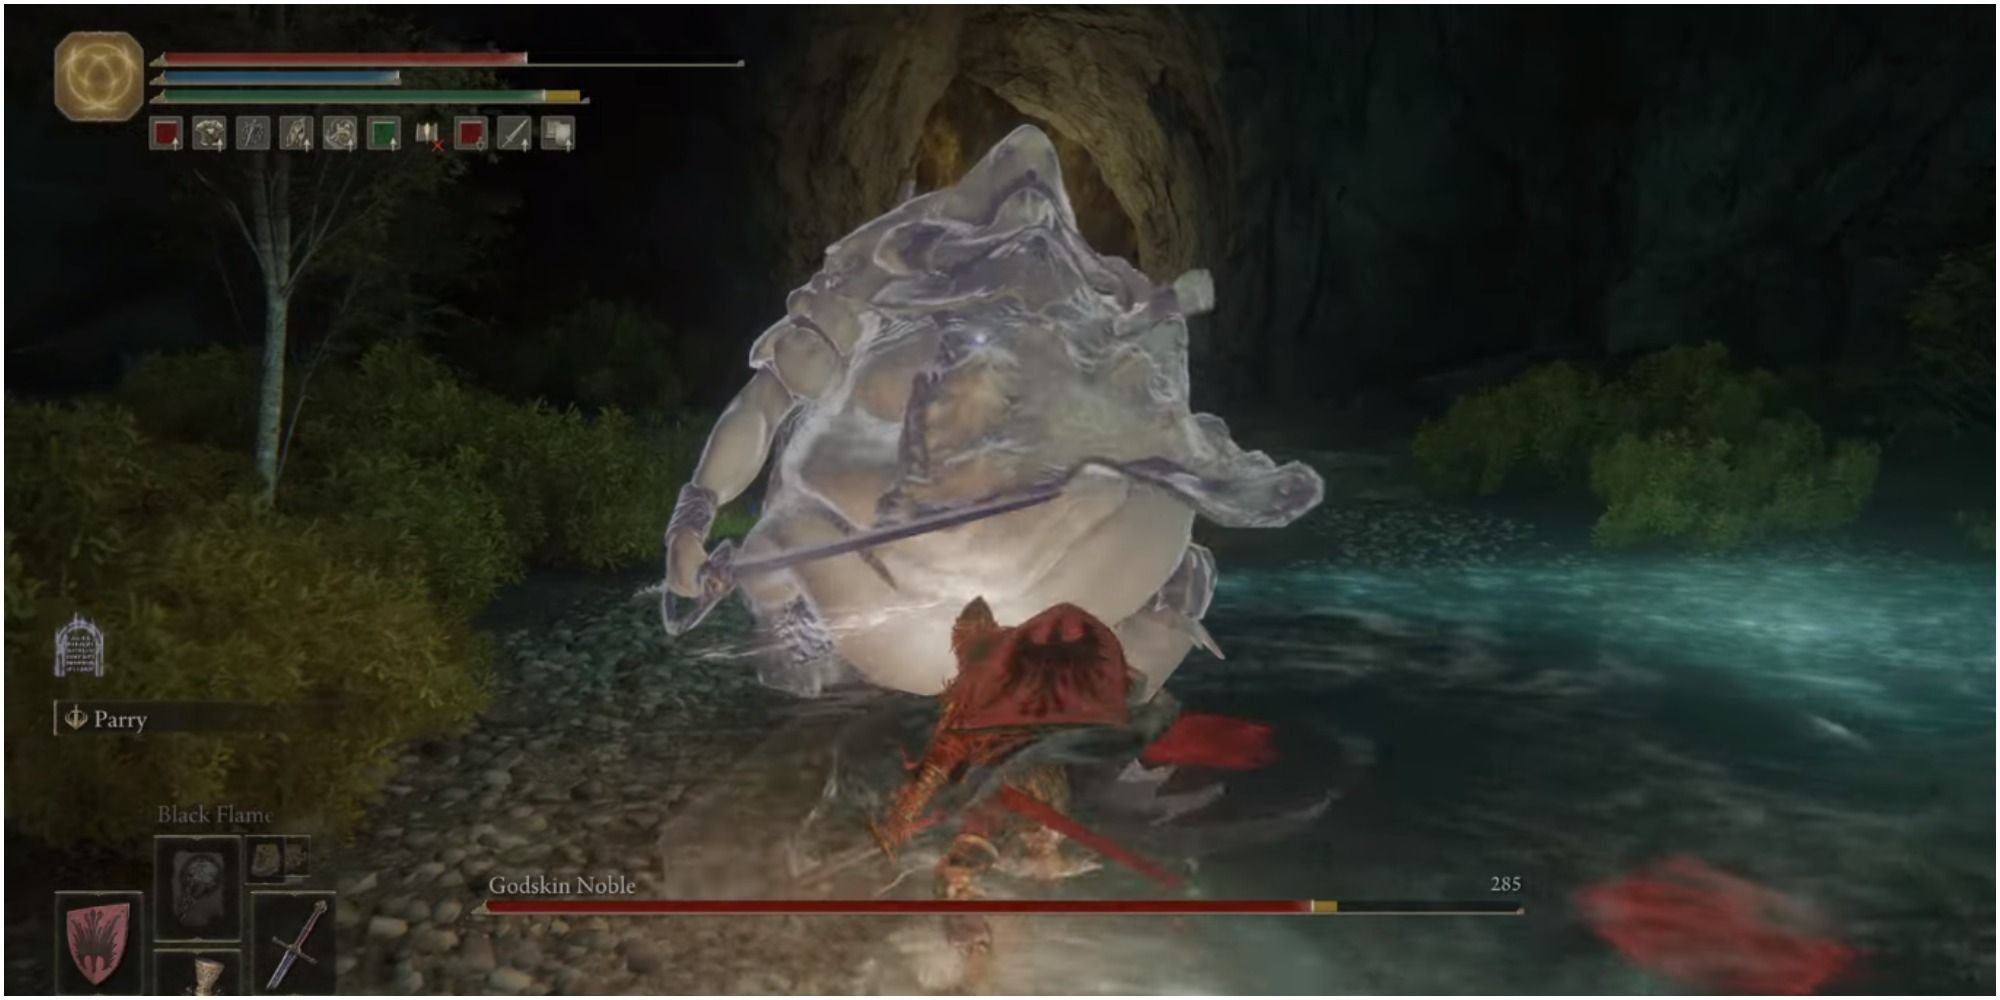 The player attacking the boss with a melee weapon.